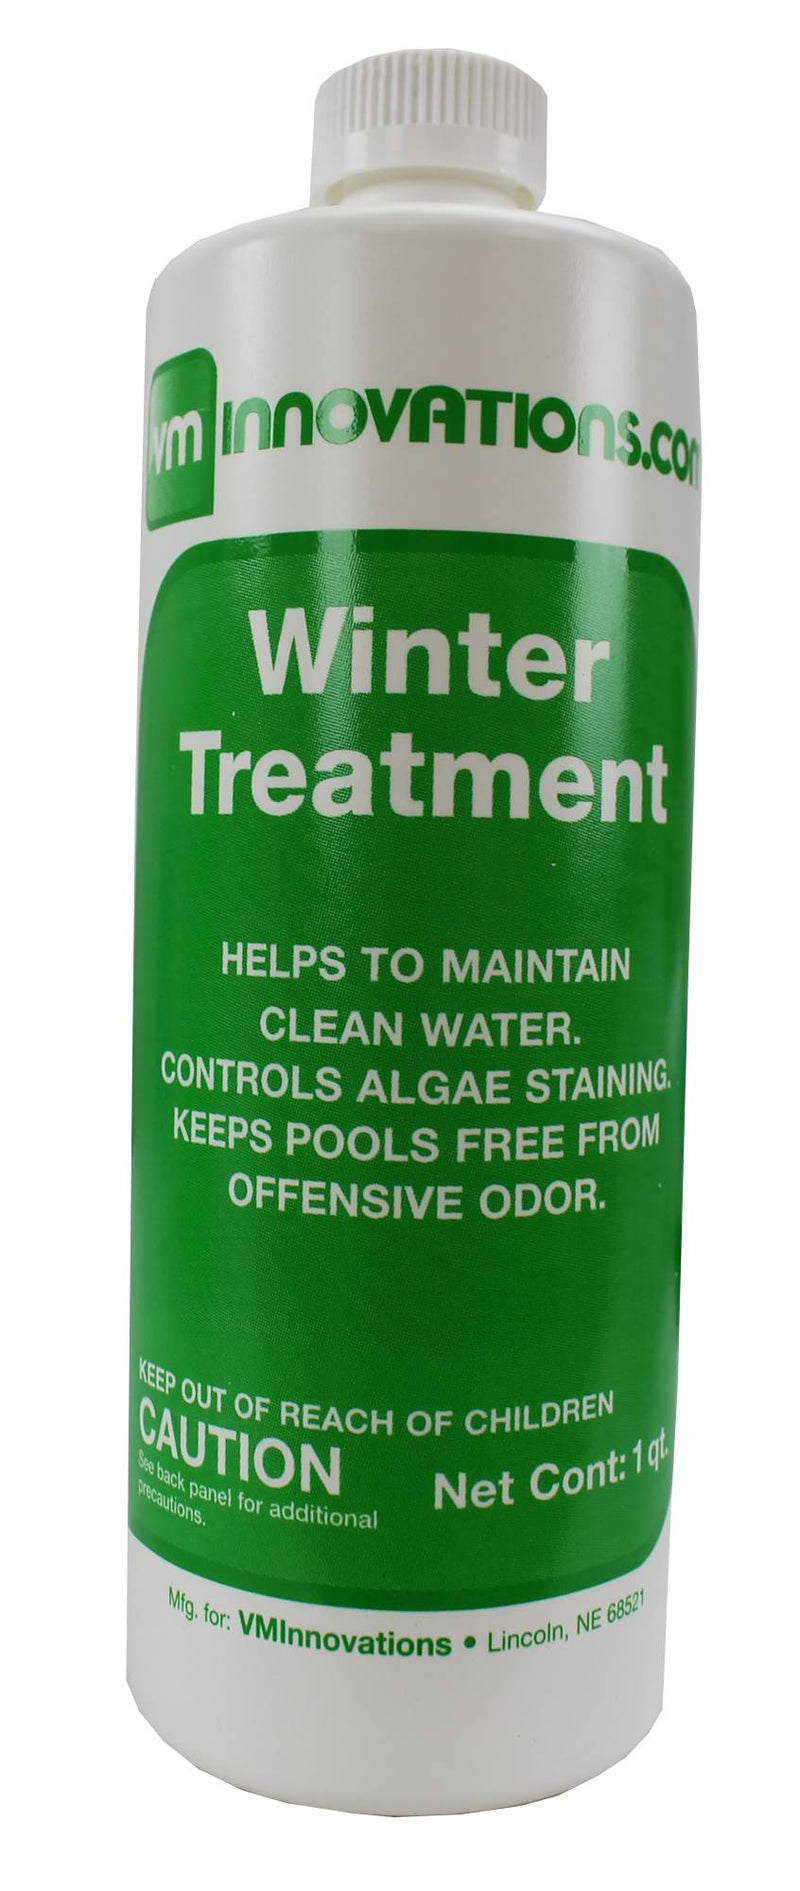 Swimming Pool Winterizing Accessory Kit for Pools Up to 30,000 Gallons (2 Pack)